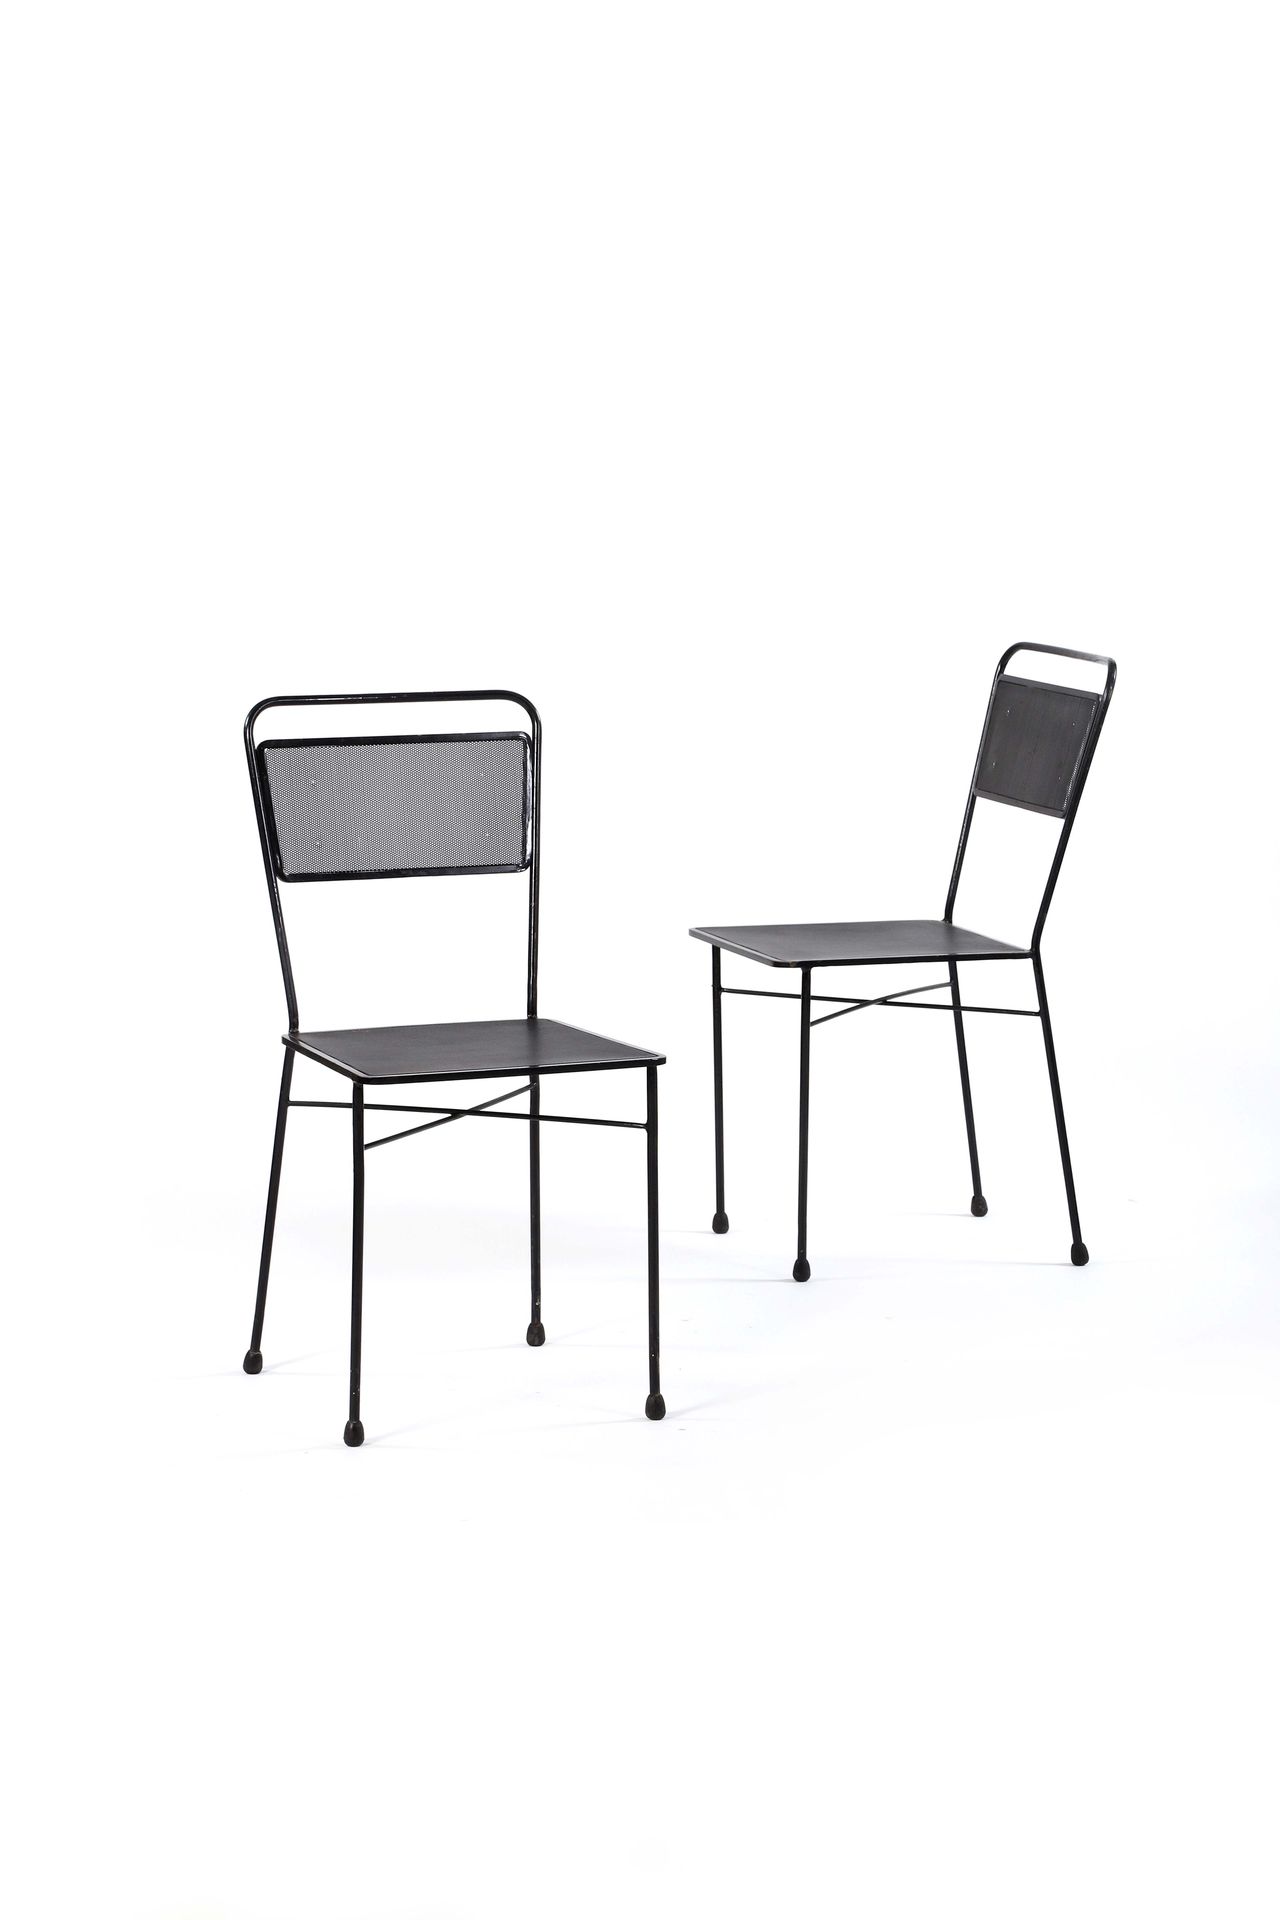 Null 32.

Mathieu MATEGOT

(1910-2001)

Pair of chairs

Perforated sheet metal

&hellip;